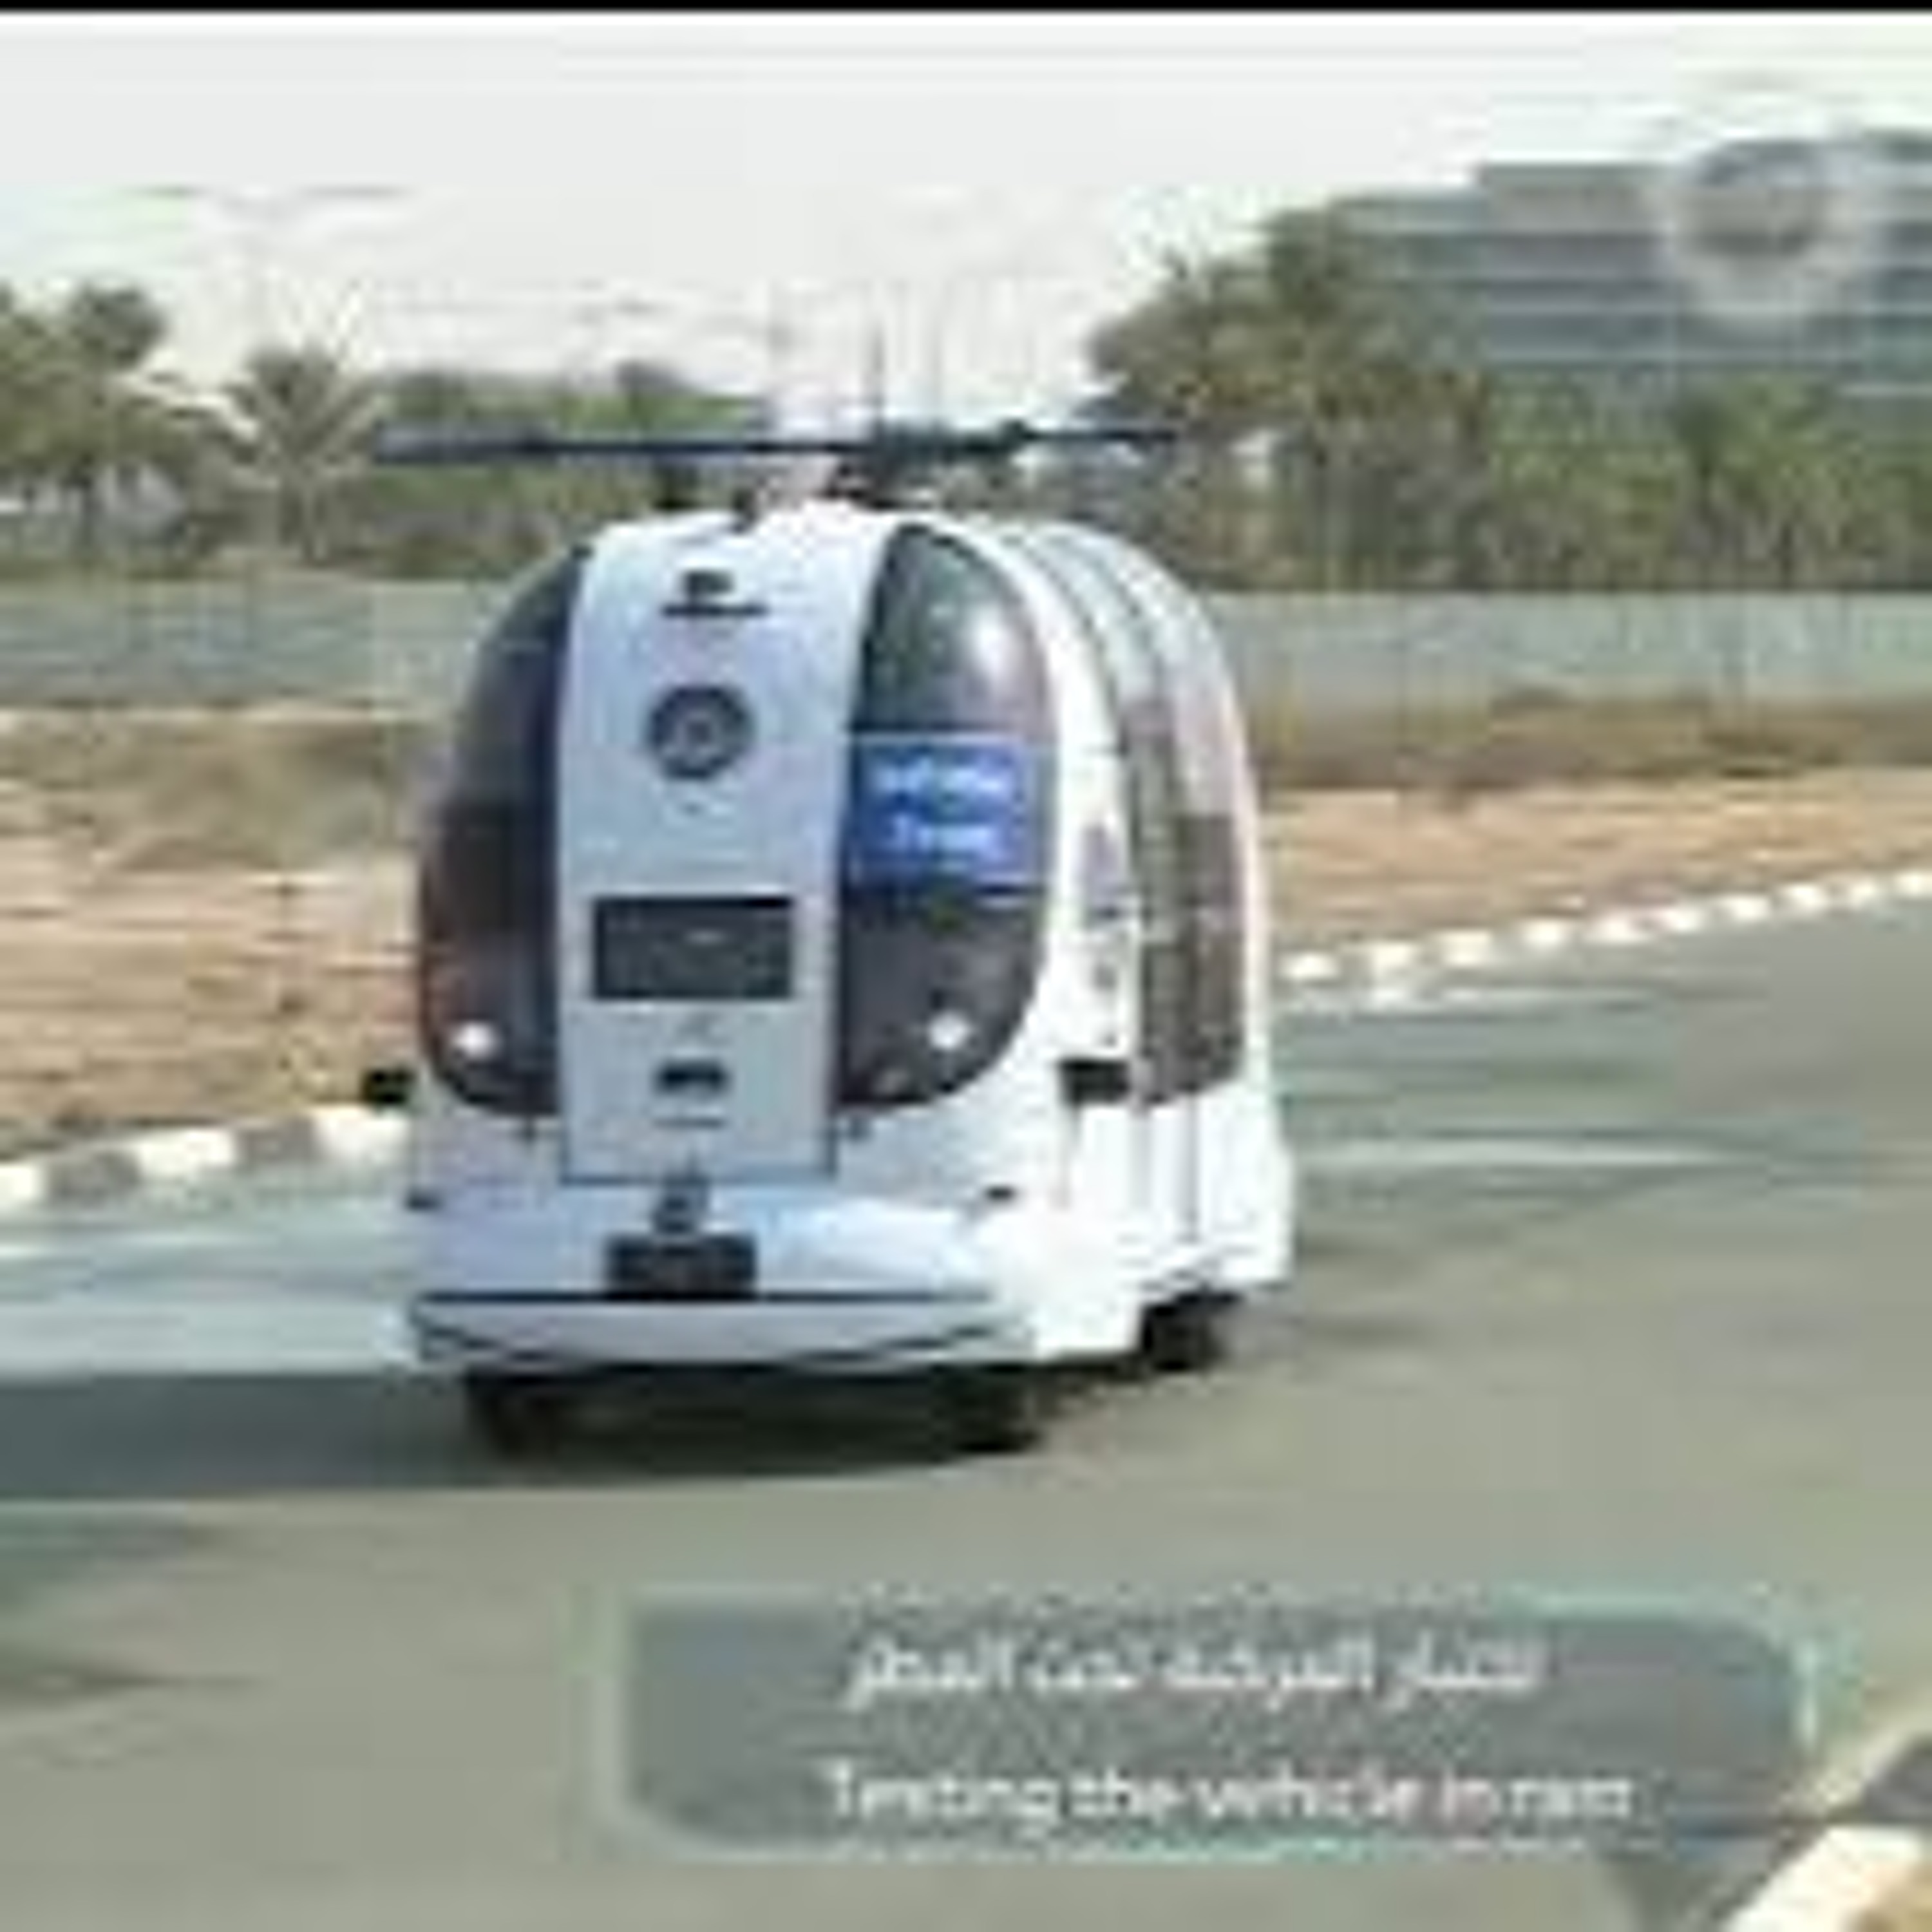 UAE First in the Arab World to Test Driverless Vehicles on Roads (10.11.21)